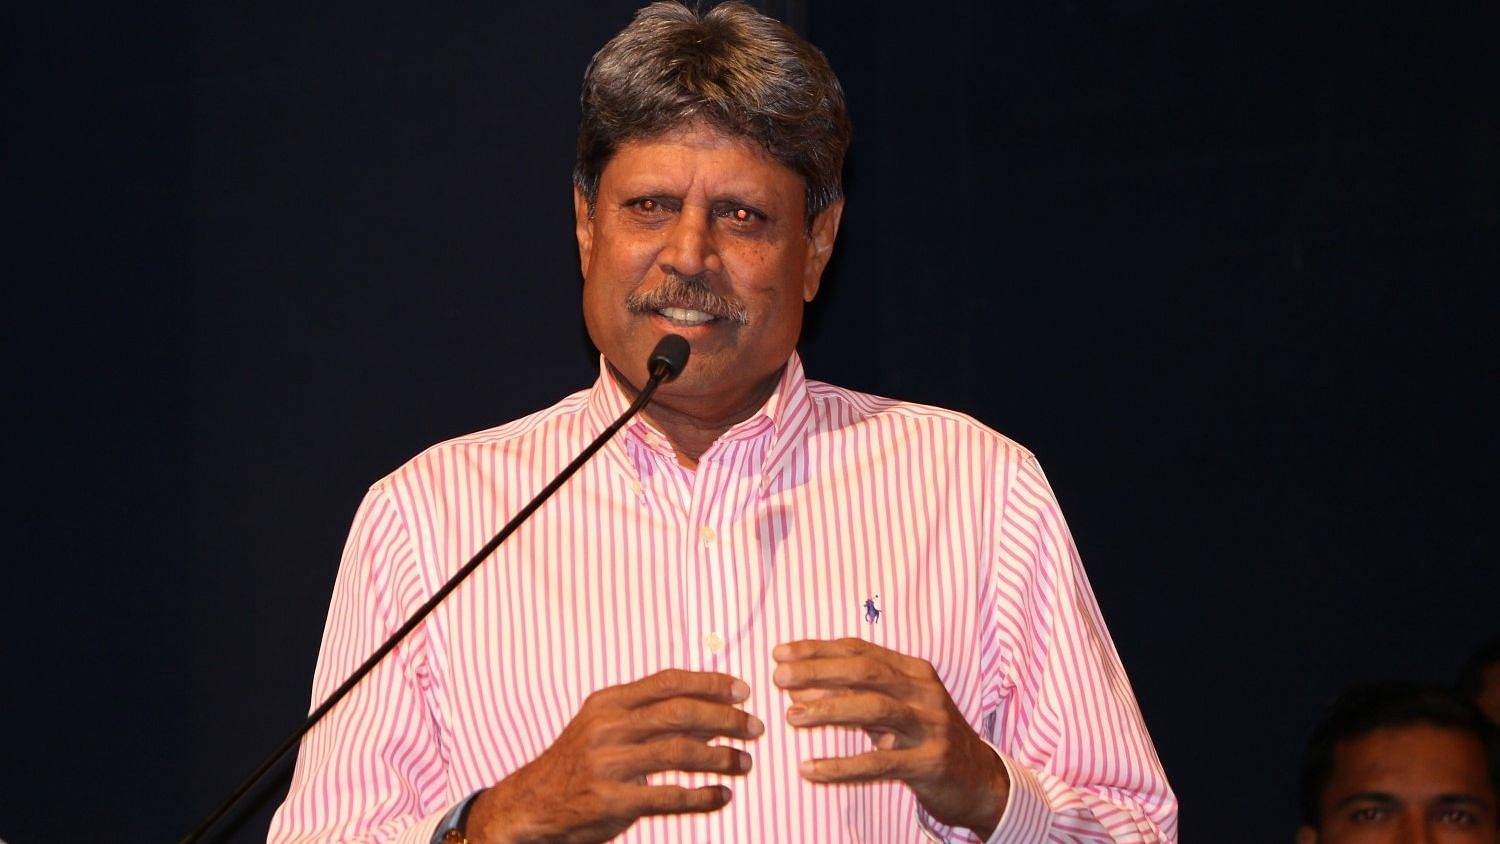 Kapil Dev had rejected Shoaib Akhtar’s suggestion of an ODI series between India and Pakistan to raise funds to fight coronavirus.